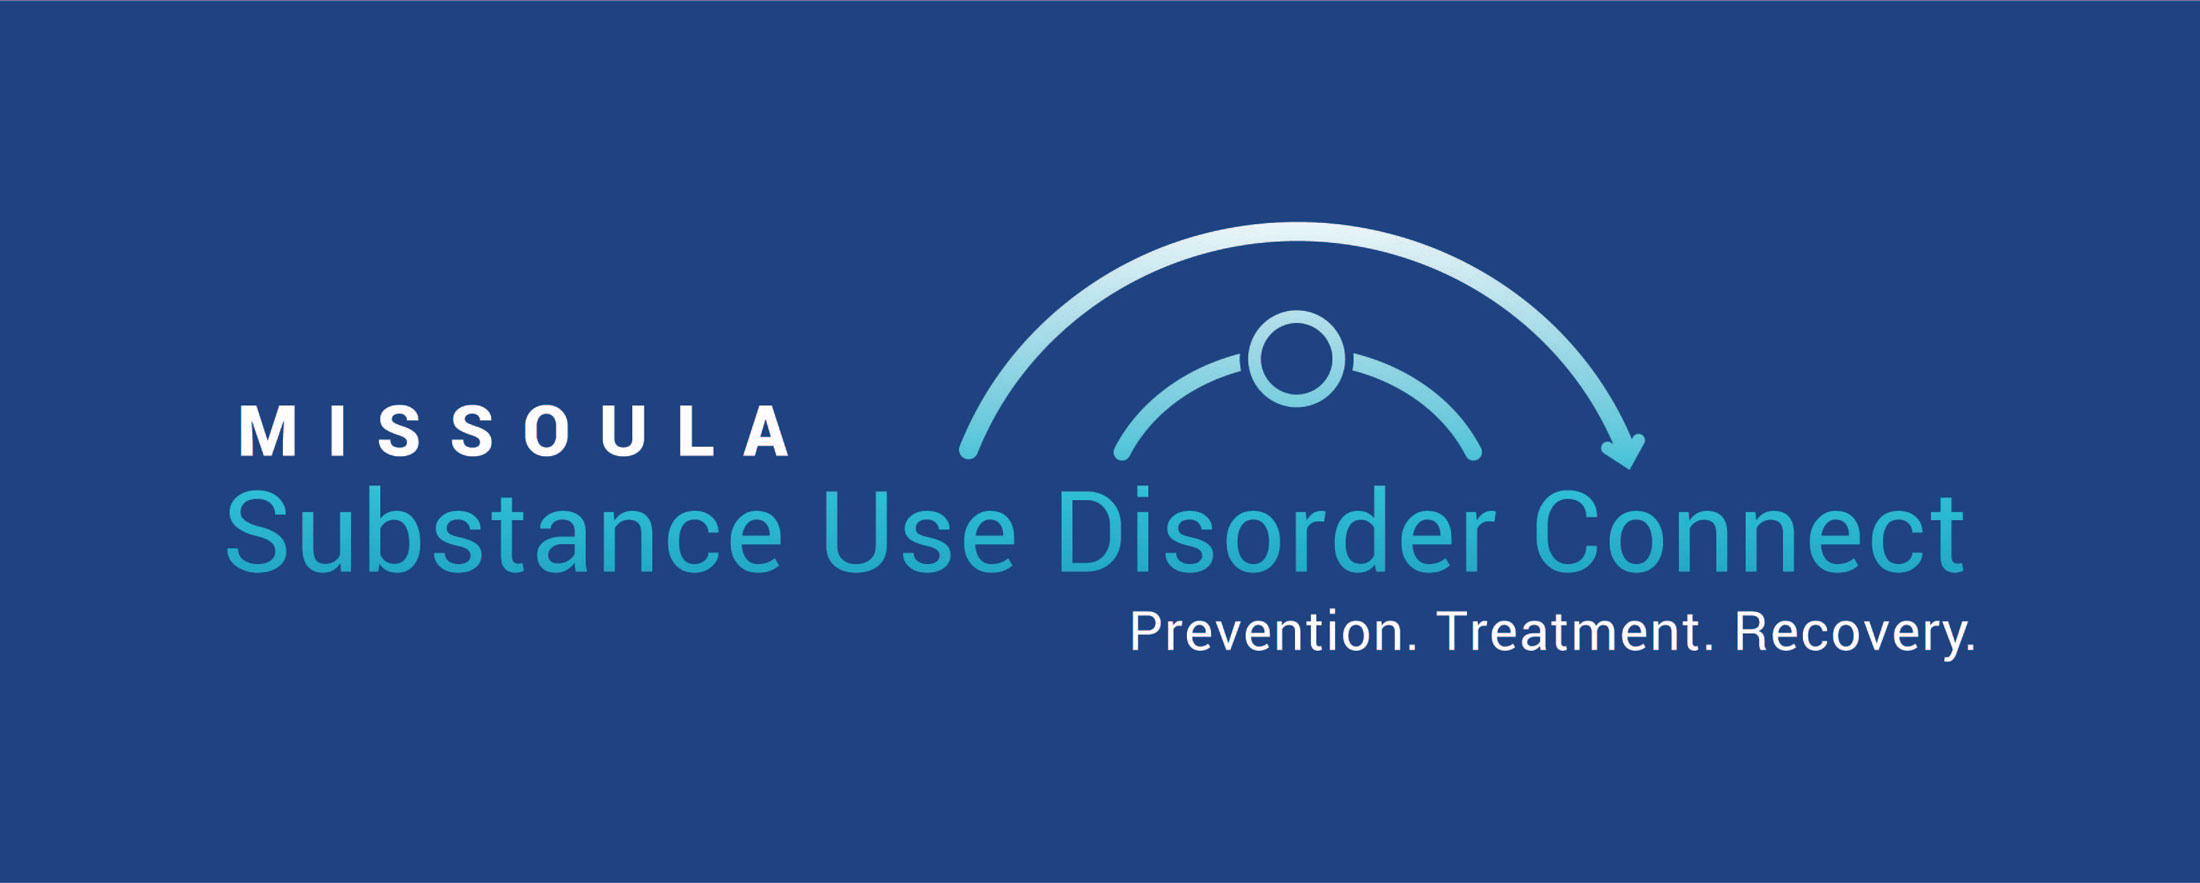 Missoula Substance use disorder connect logo. Prevention, treatment, recovery